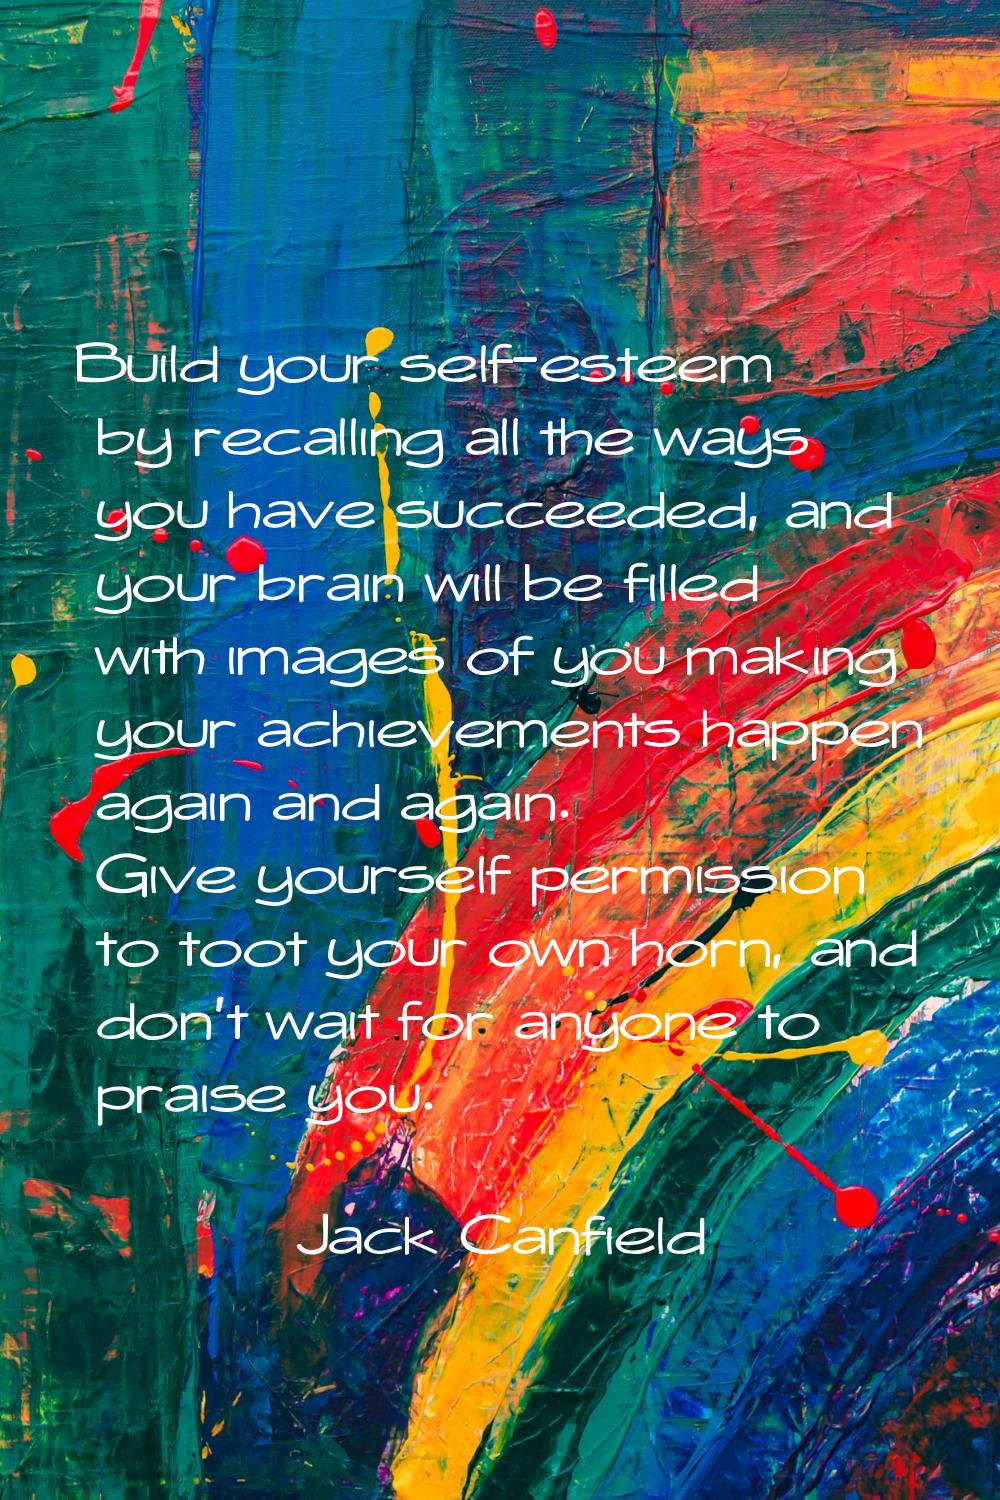 Build your self-esteem by recalling all the ways you have succeeded, and your brain will be filled 